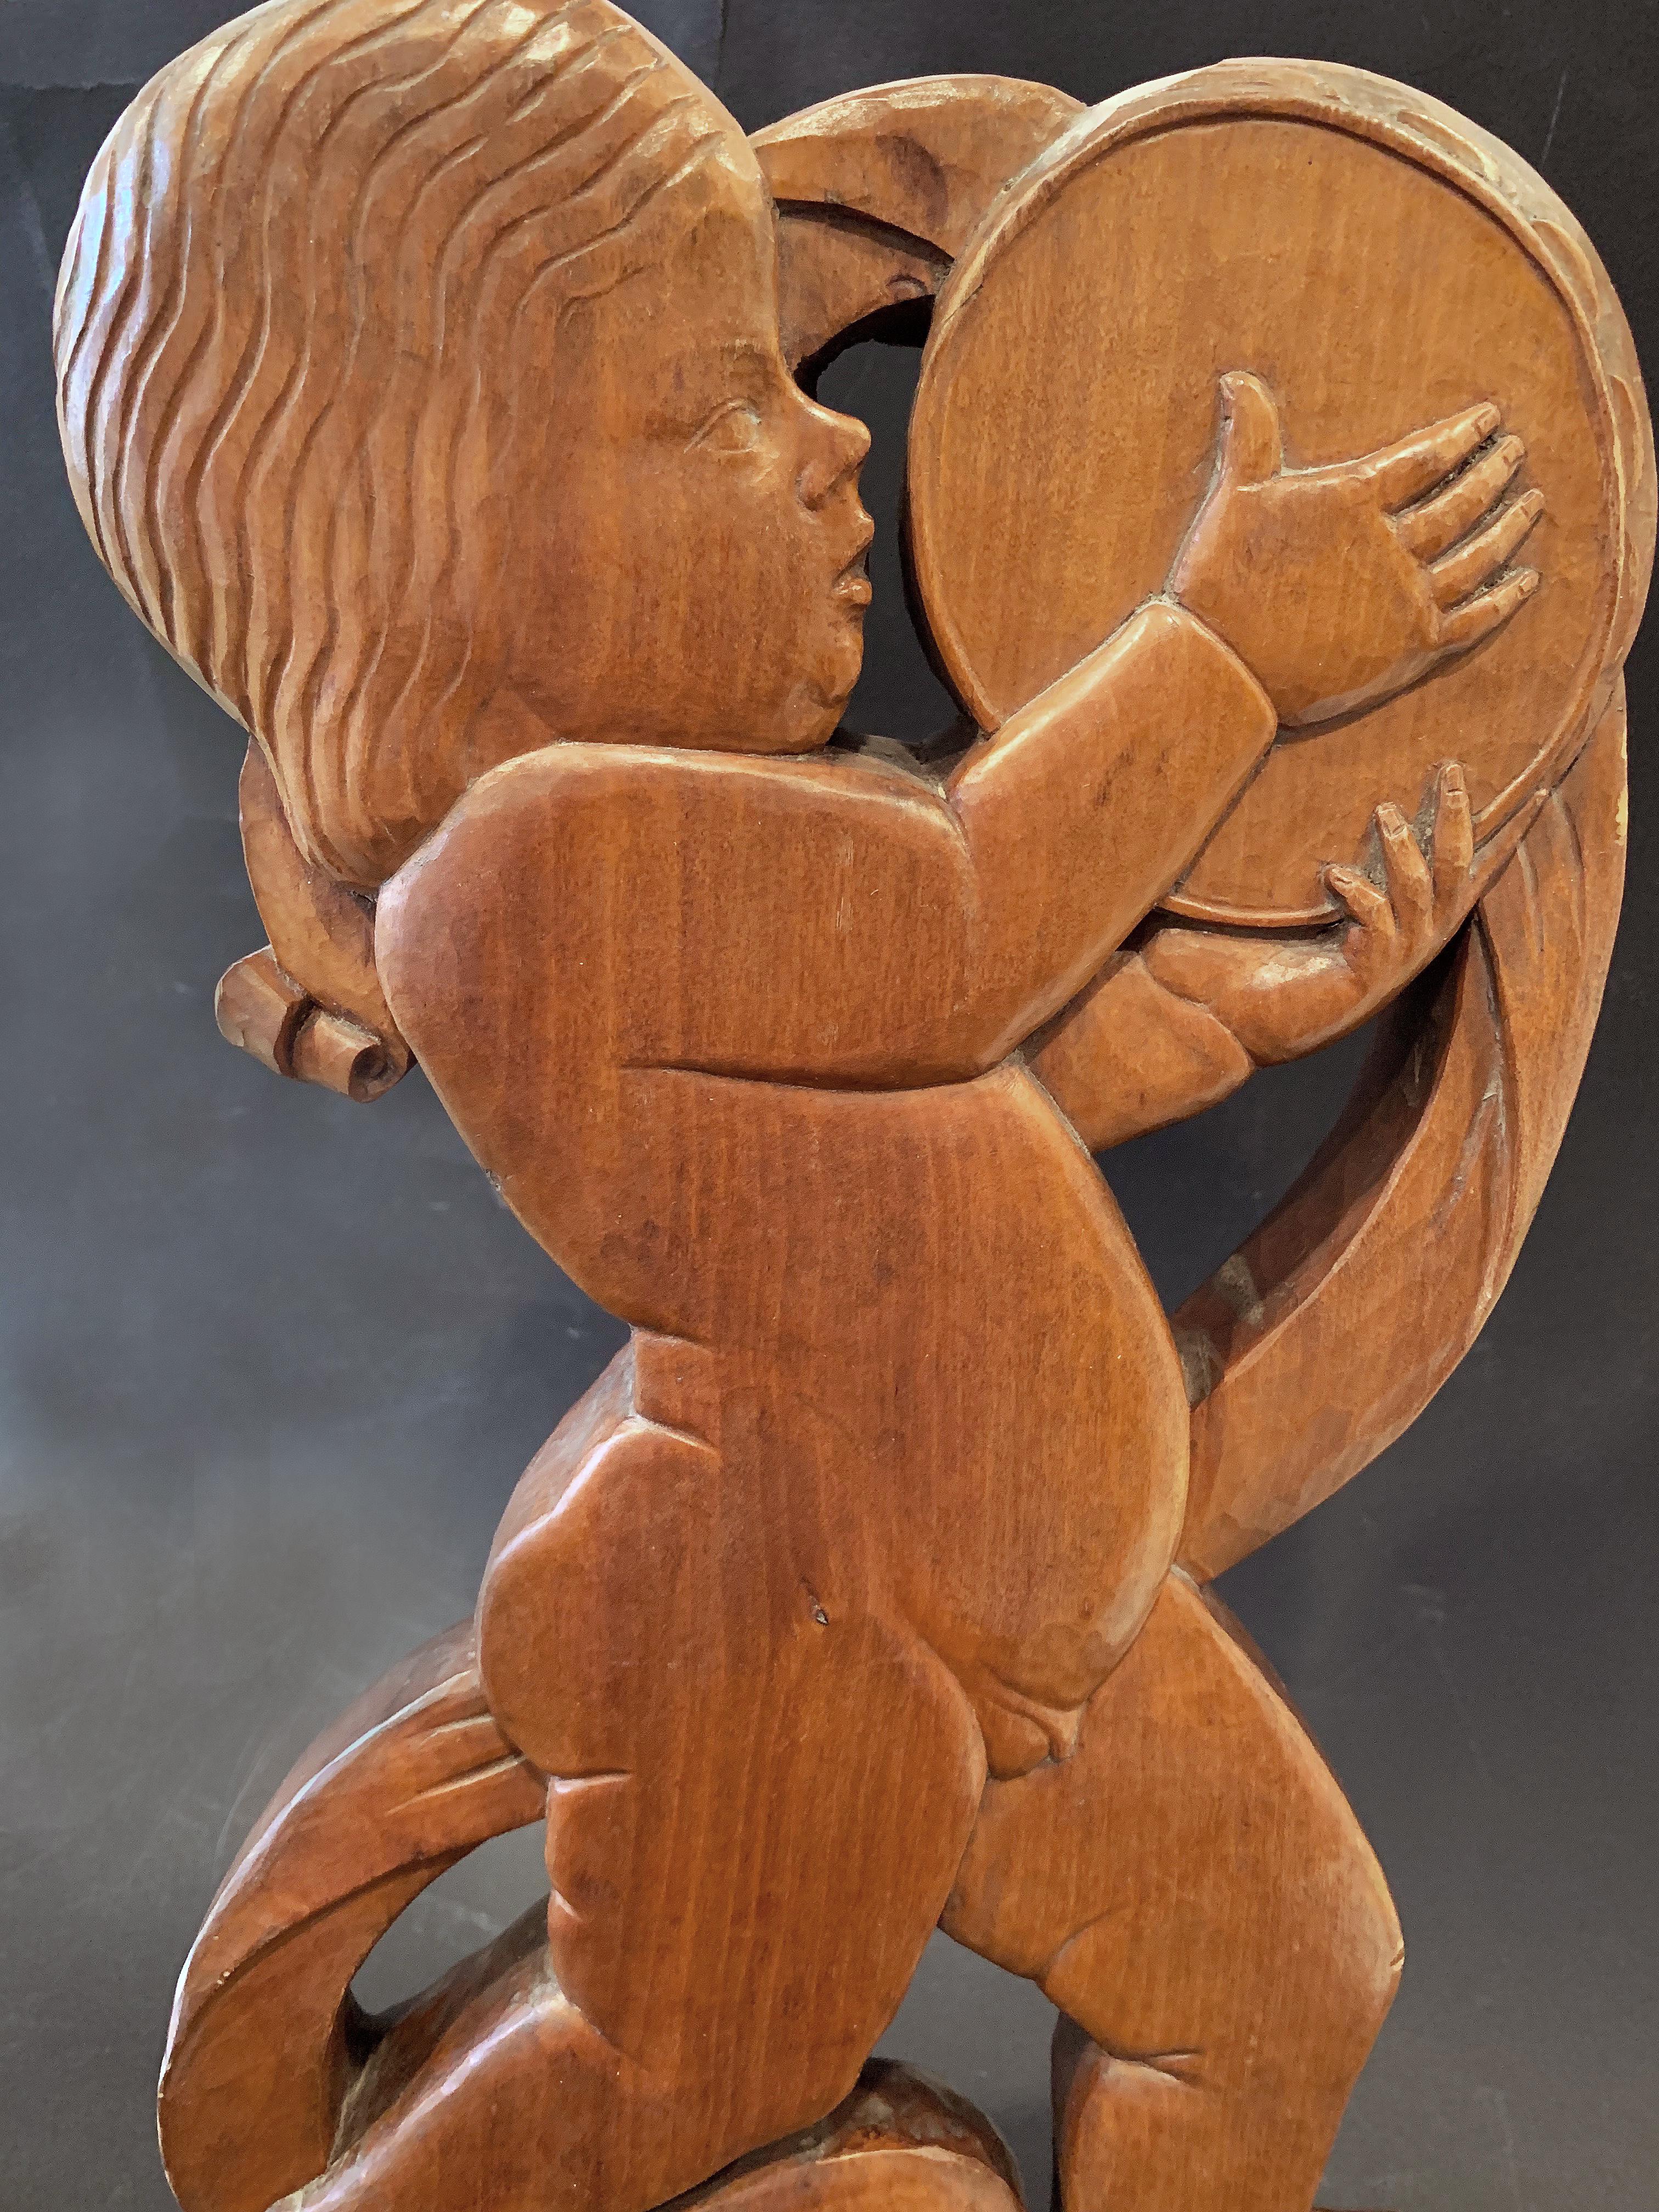 Clearly carved by a master, this spirited and subtle sculpture of a striding baby boy hitting a tambourine and encircled by a winding scroll is a very fine example of Art Deco hand-carving. Sculpted from a beautiful block of American walnut, the